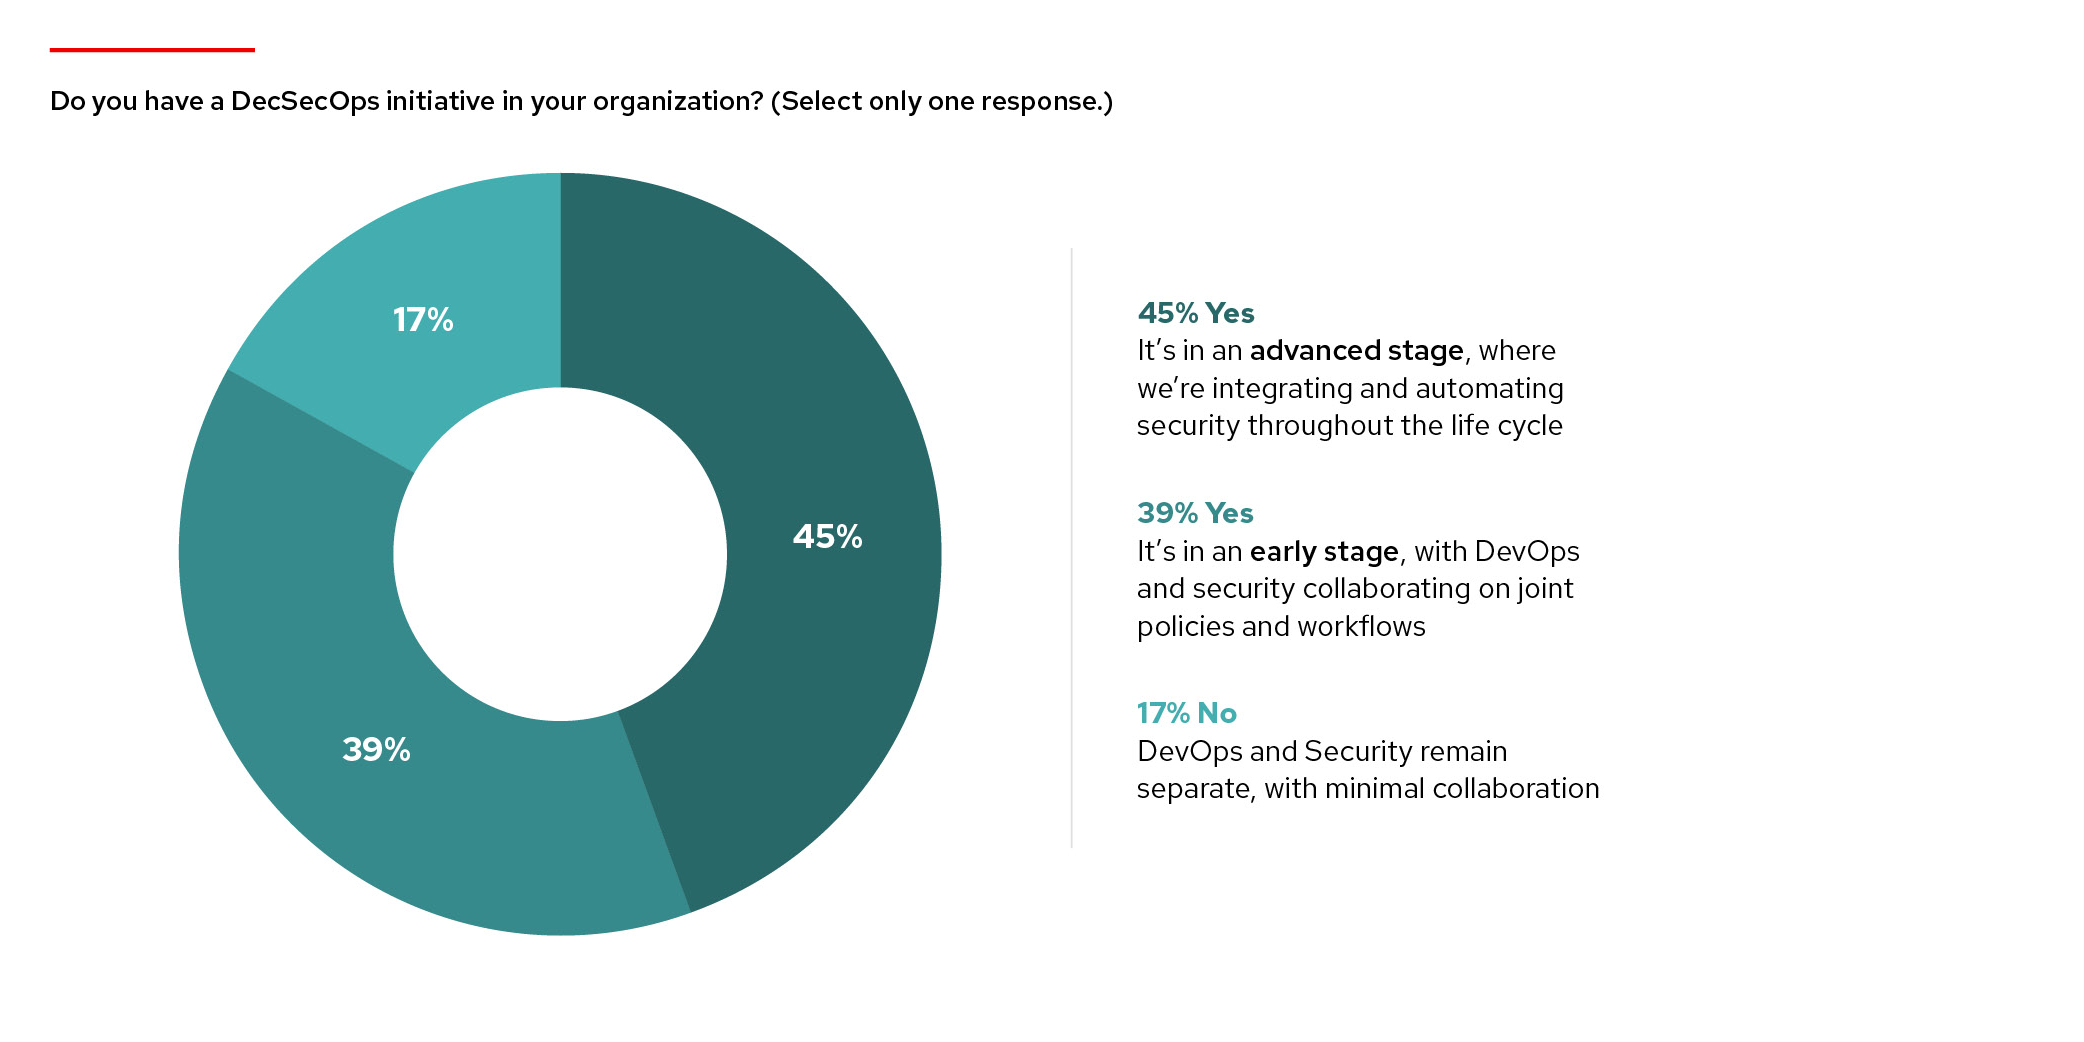 Chart: Do you have a DevSecOps initiative in your organization? (Select only one response.) 45% answered Yes, it’s in an advanced stage where we’re integrating and automating security throughout the life cycle. 39% answered Yes, it’s in an early stage, with DevOps and security collaborating on joint policies and workflows. 17% answered No, DevOps and Security remain separate, with minimal collaboration.